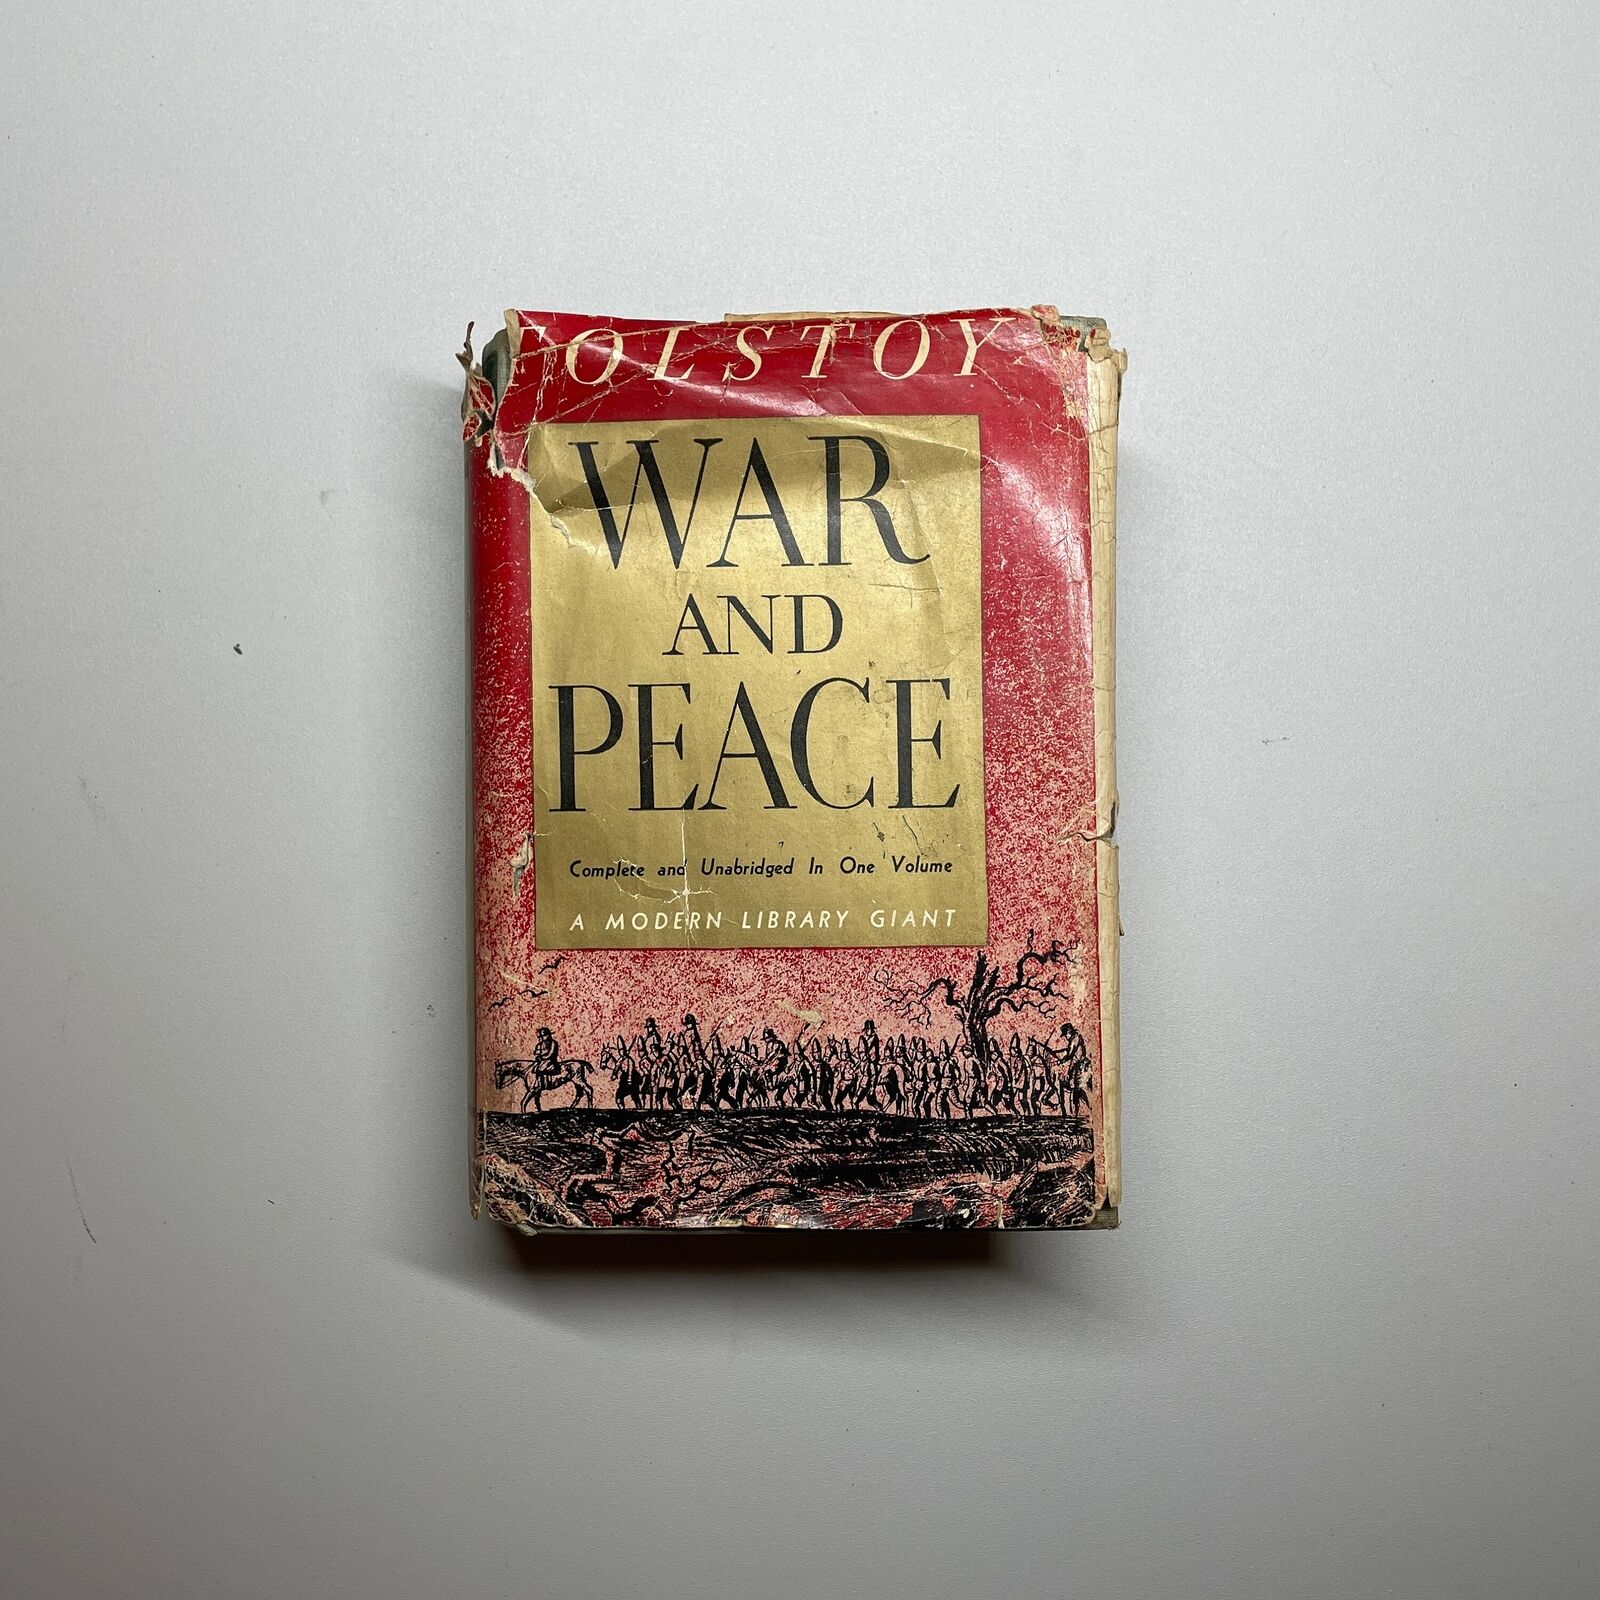 War and Peace by Tolstoy Rare 1950s Edition